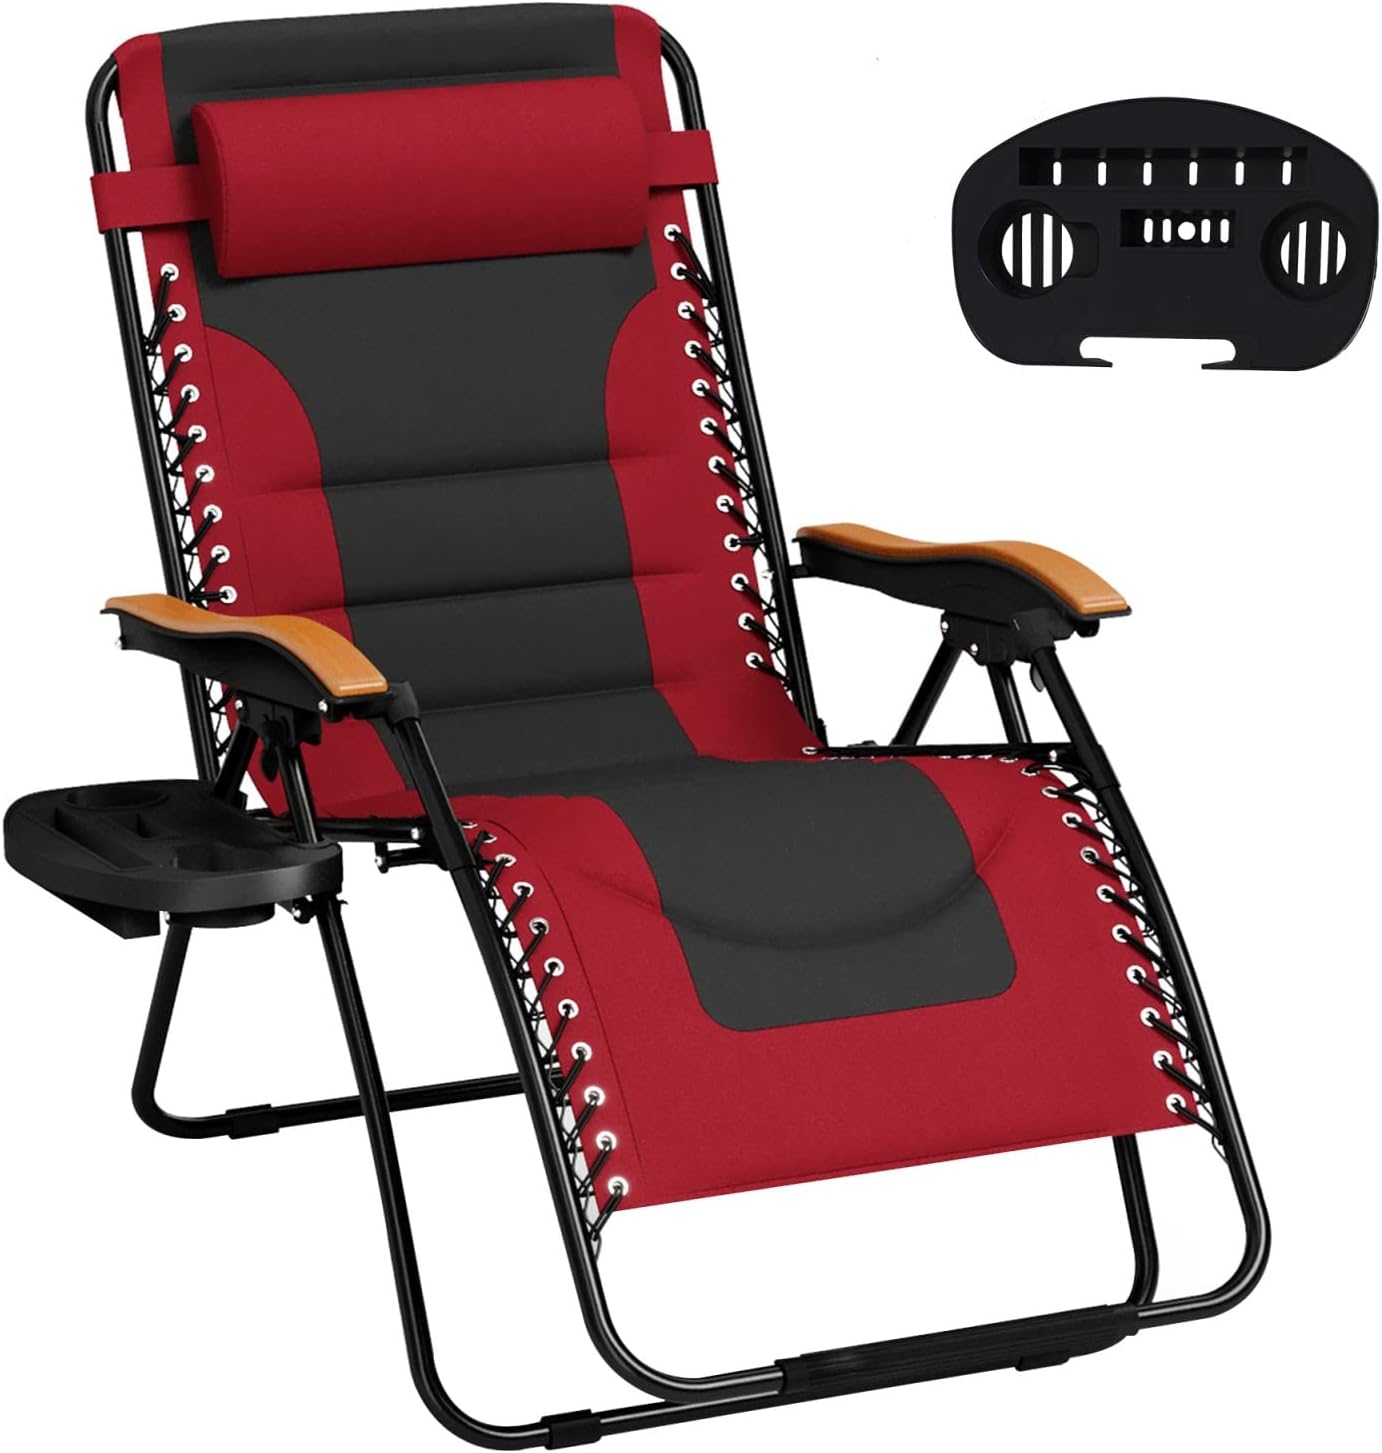 MFSTUDIO Zero Gravity Chairs, Oversized Patio Recliner Chair, Padded Folding Lawn Chair with Cup Holder Tray, Support 400lbs, Red